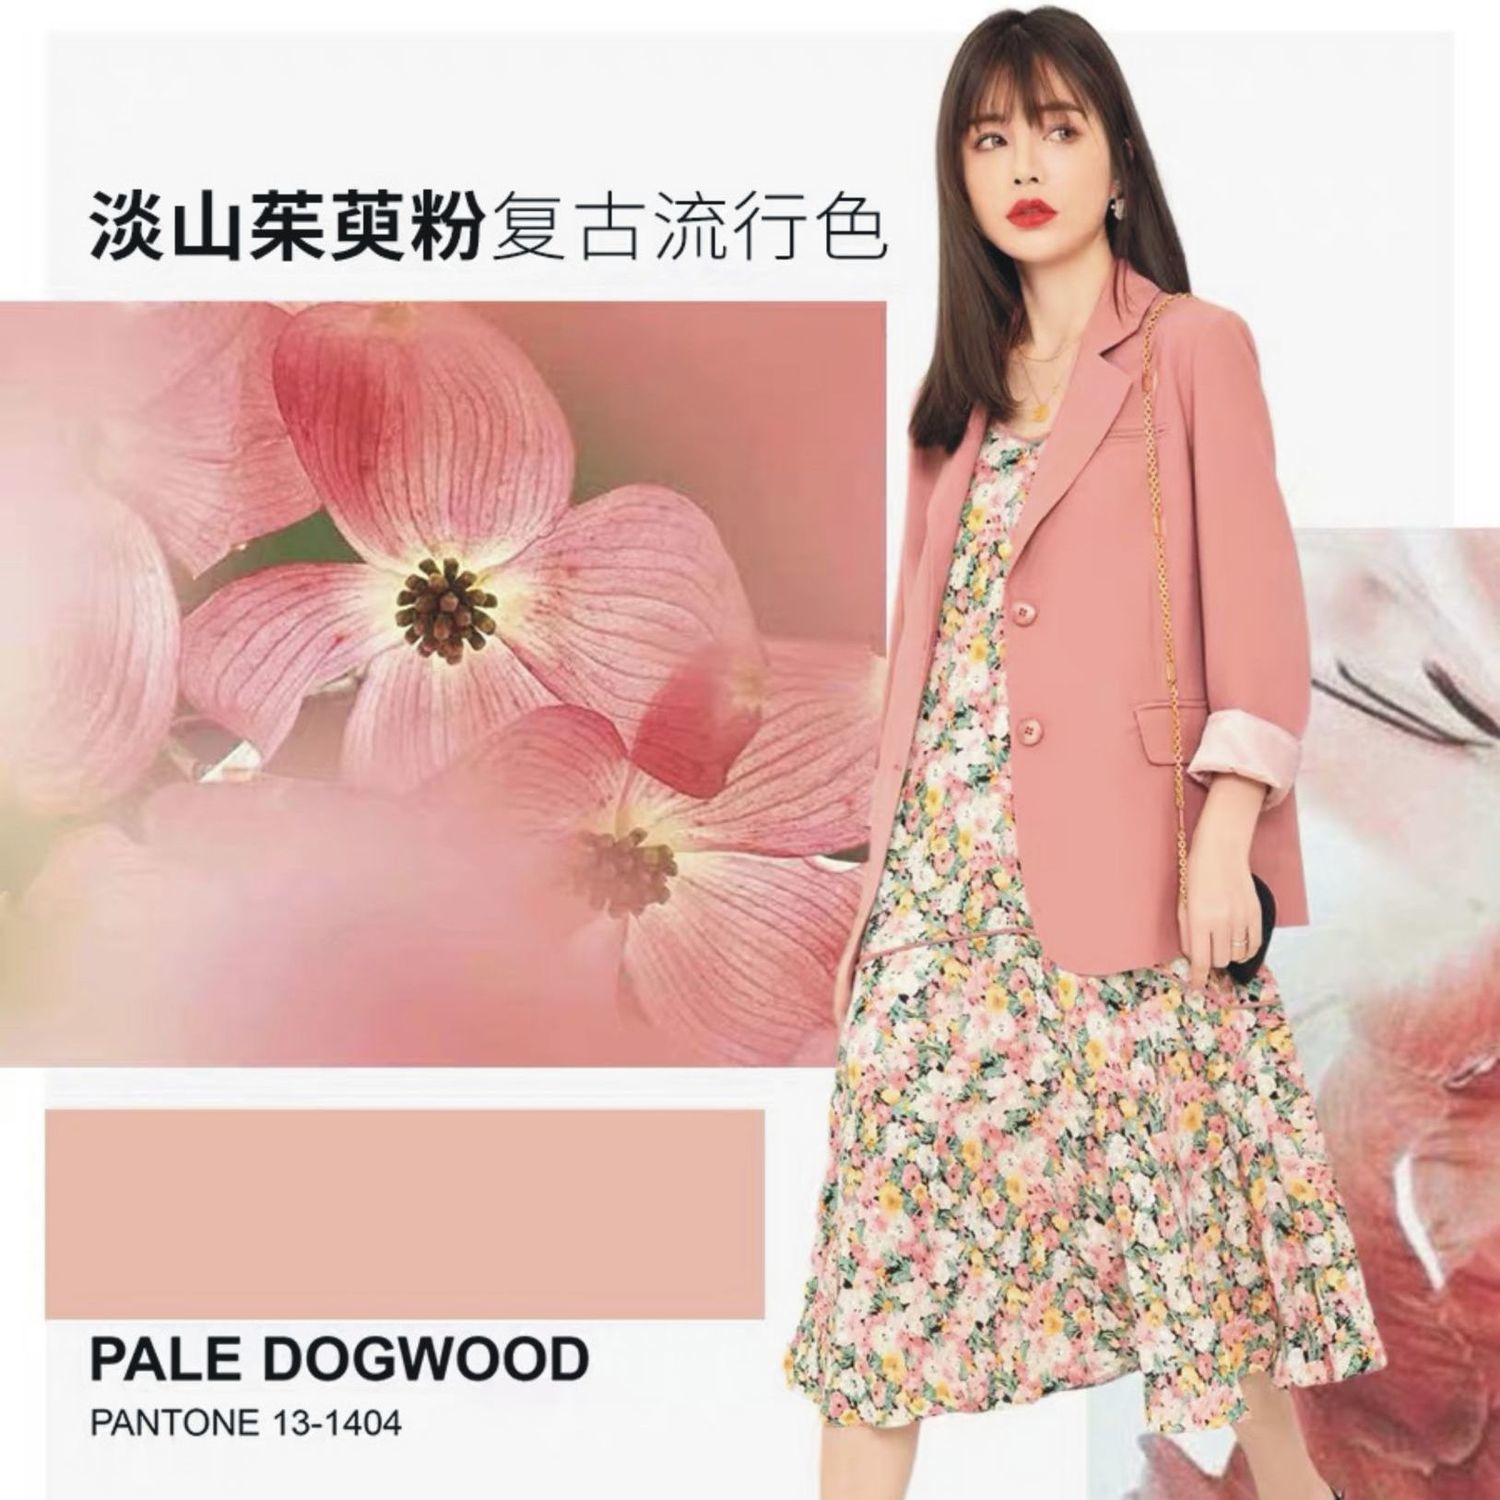 Small suit jacket women's 2022 spring and autumn new Korean version of casual high-end fried street temperament small suit loose top